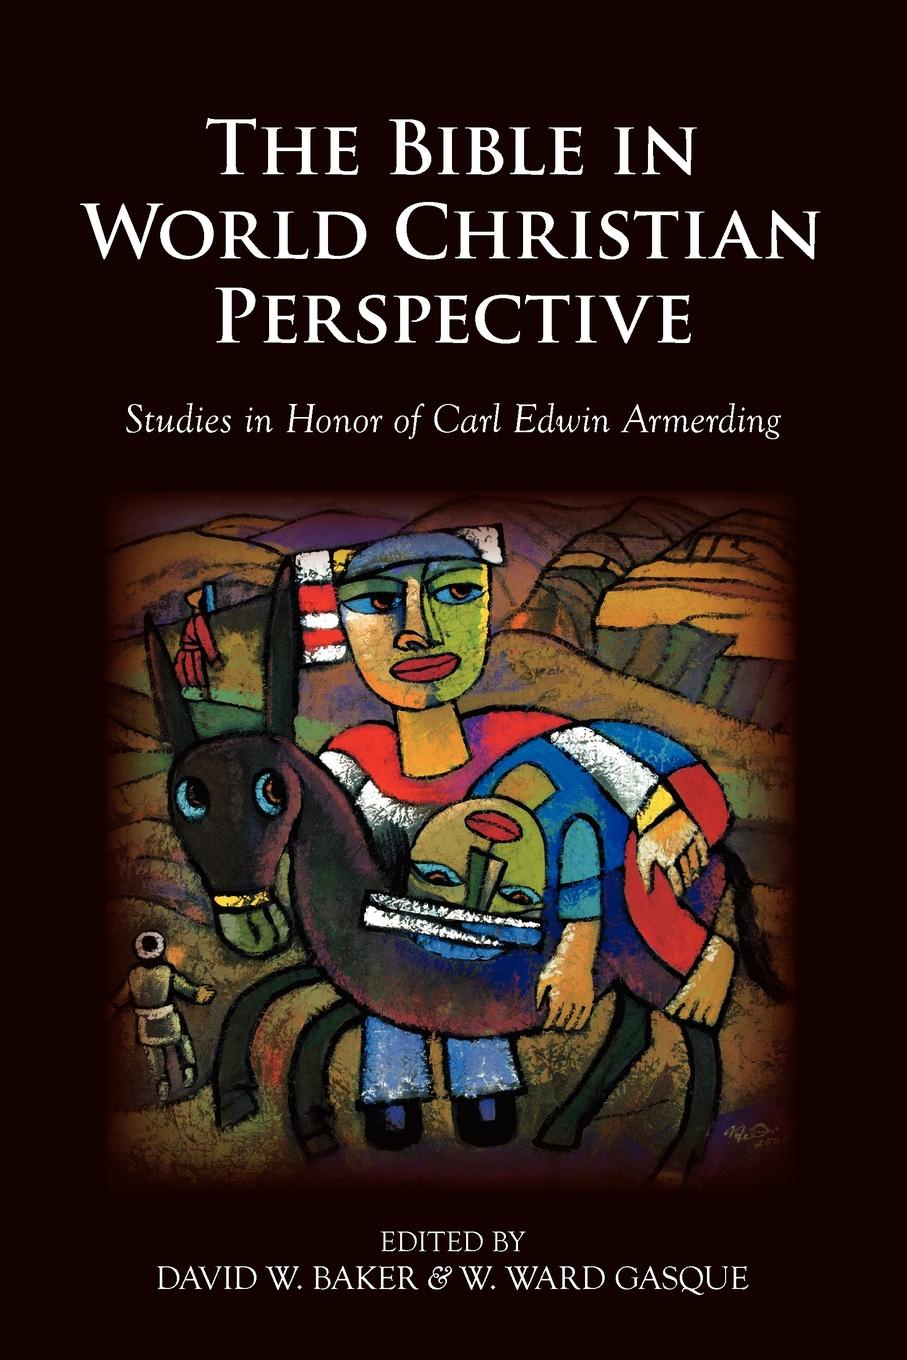 The Bible in World Christian Perspective. Studies in Honor of Carl Edwin Armerding